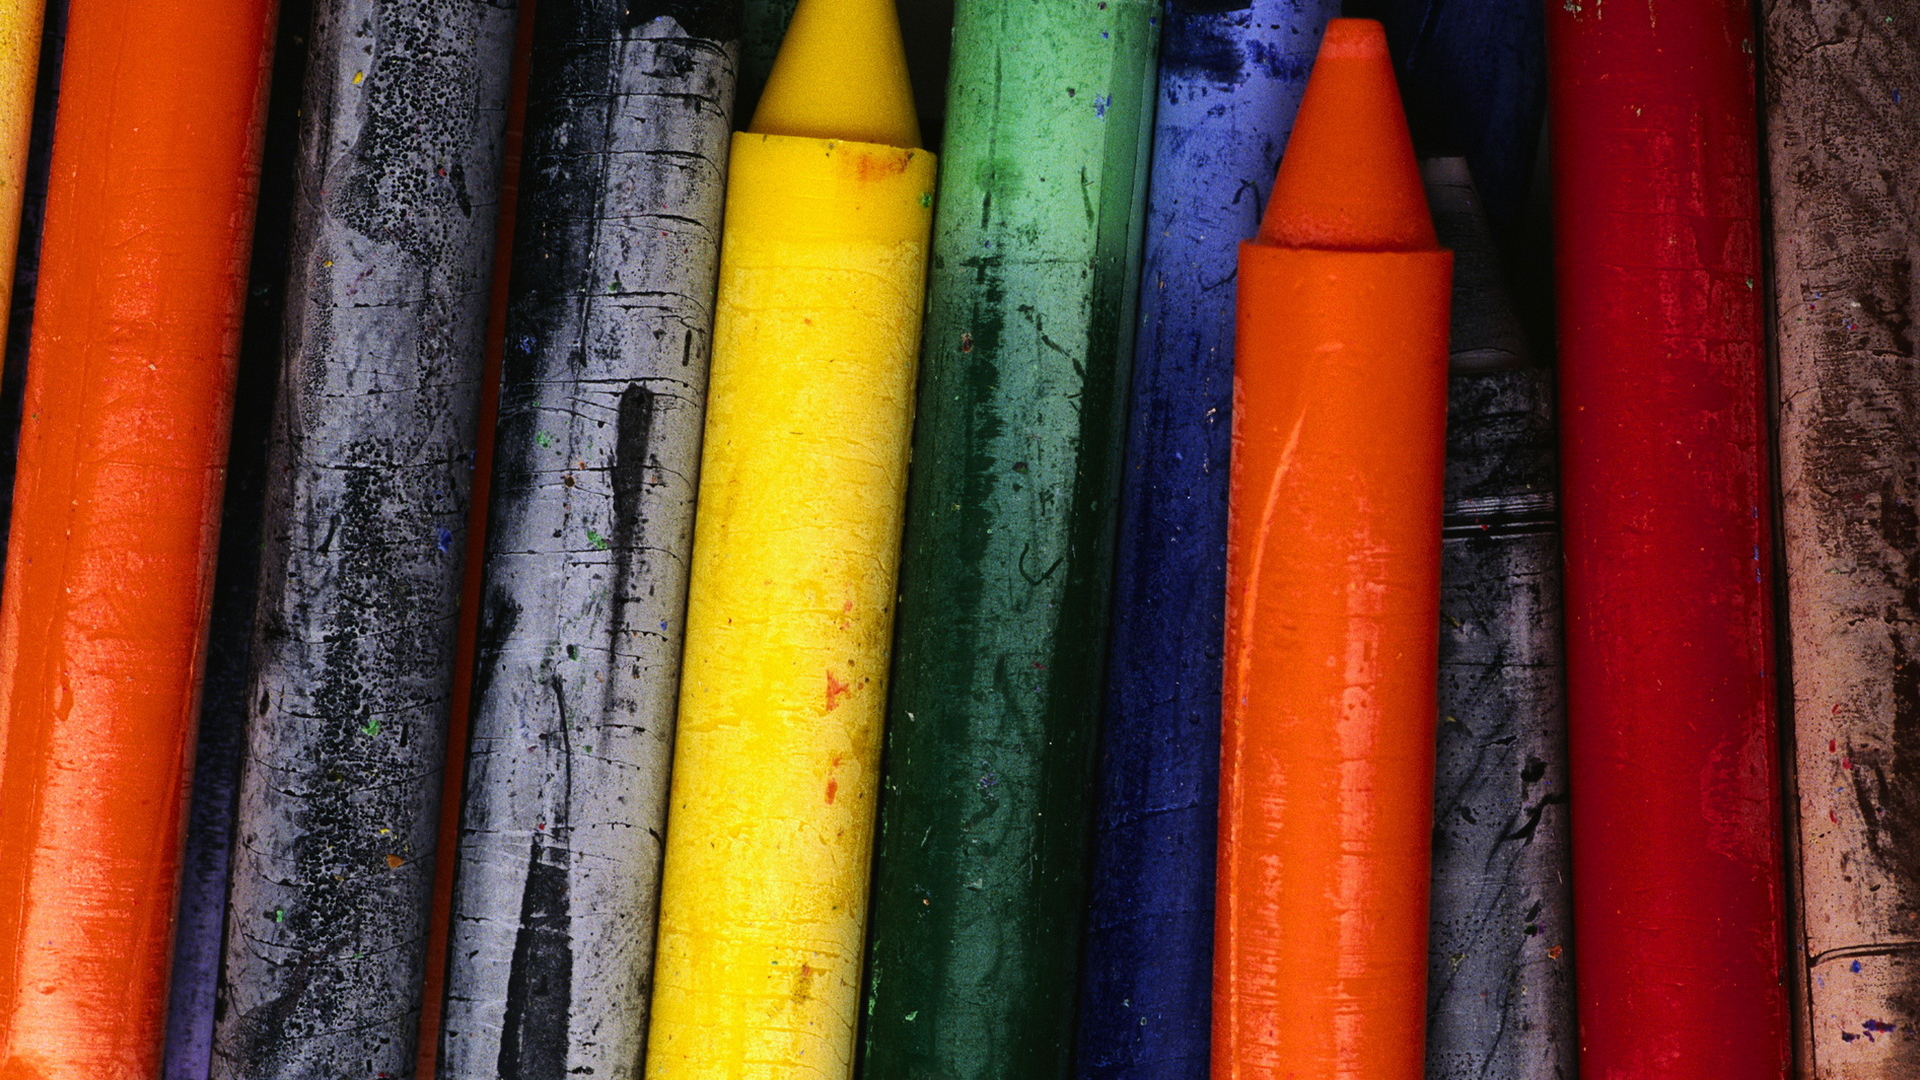 Colorful crayons